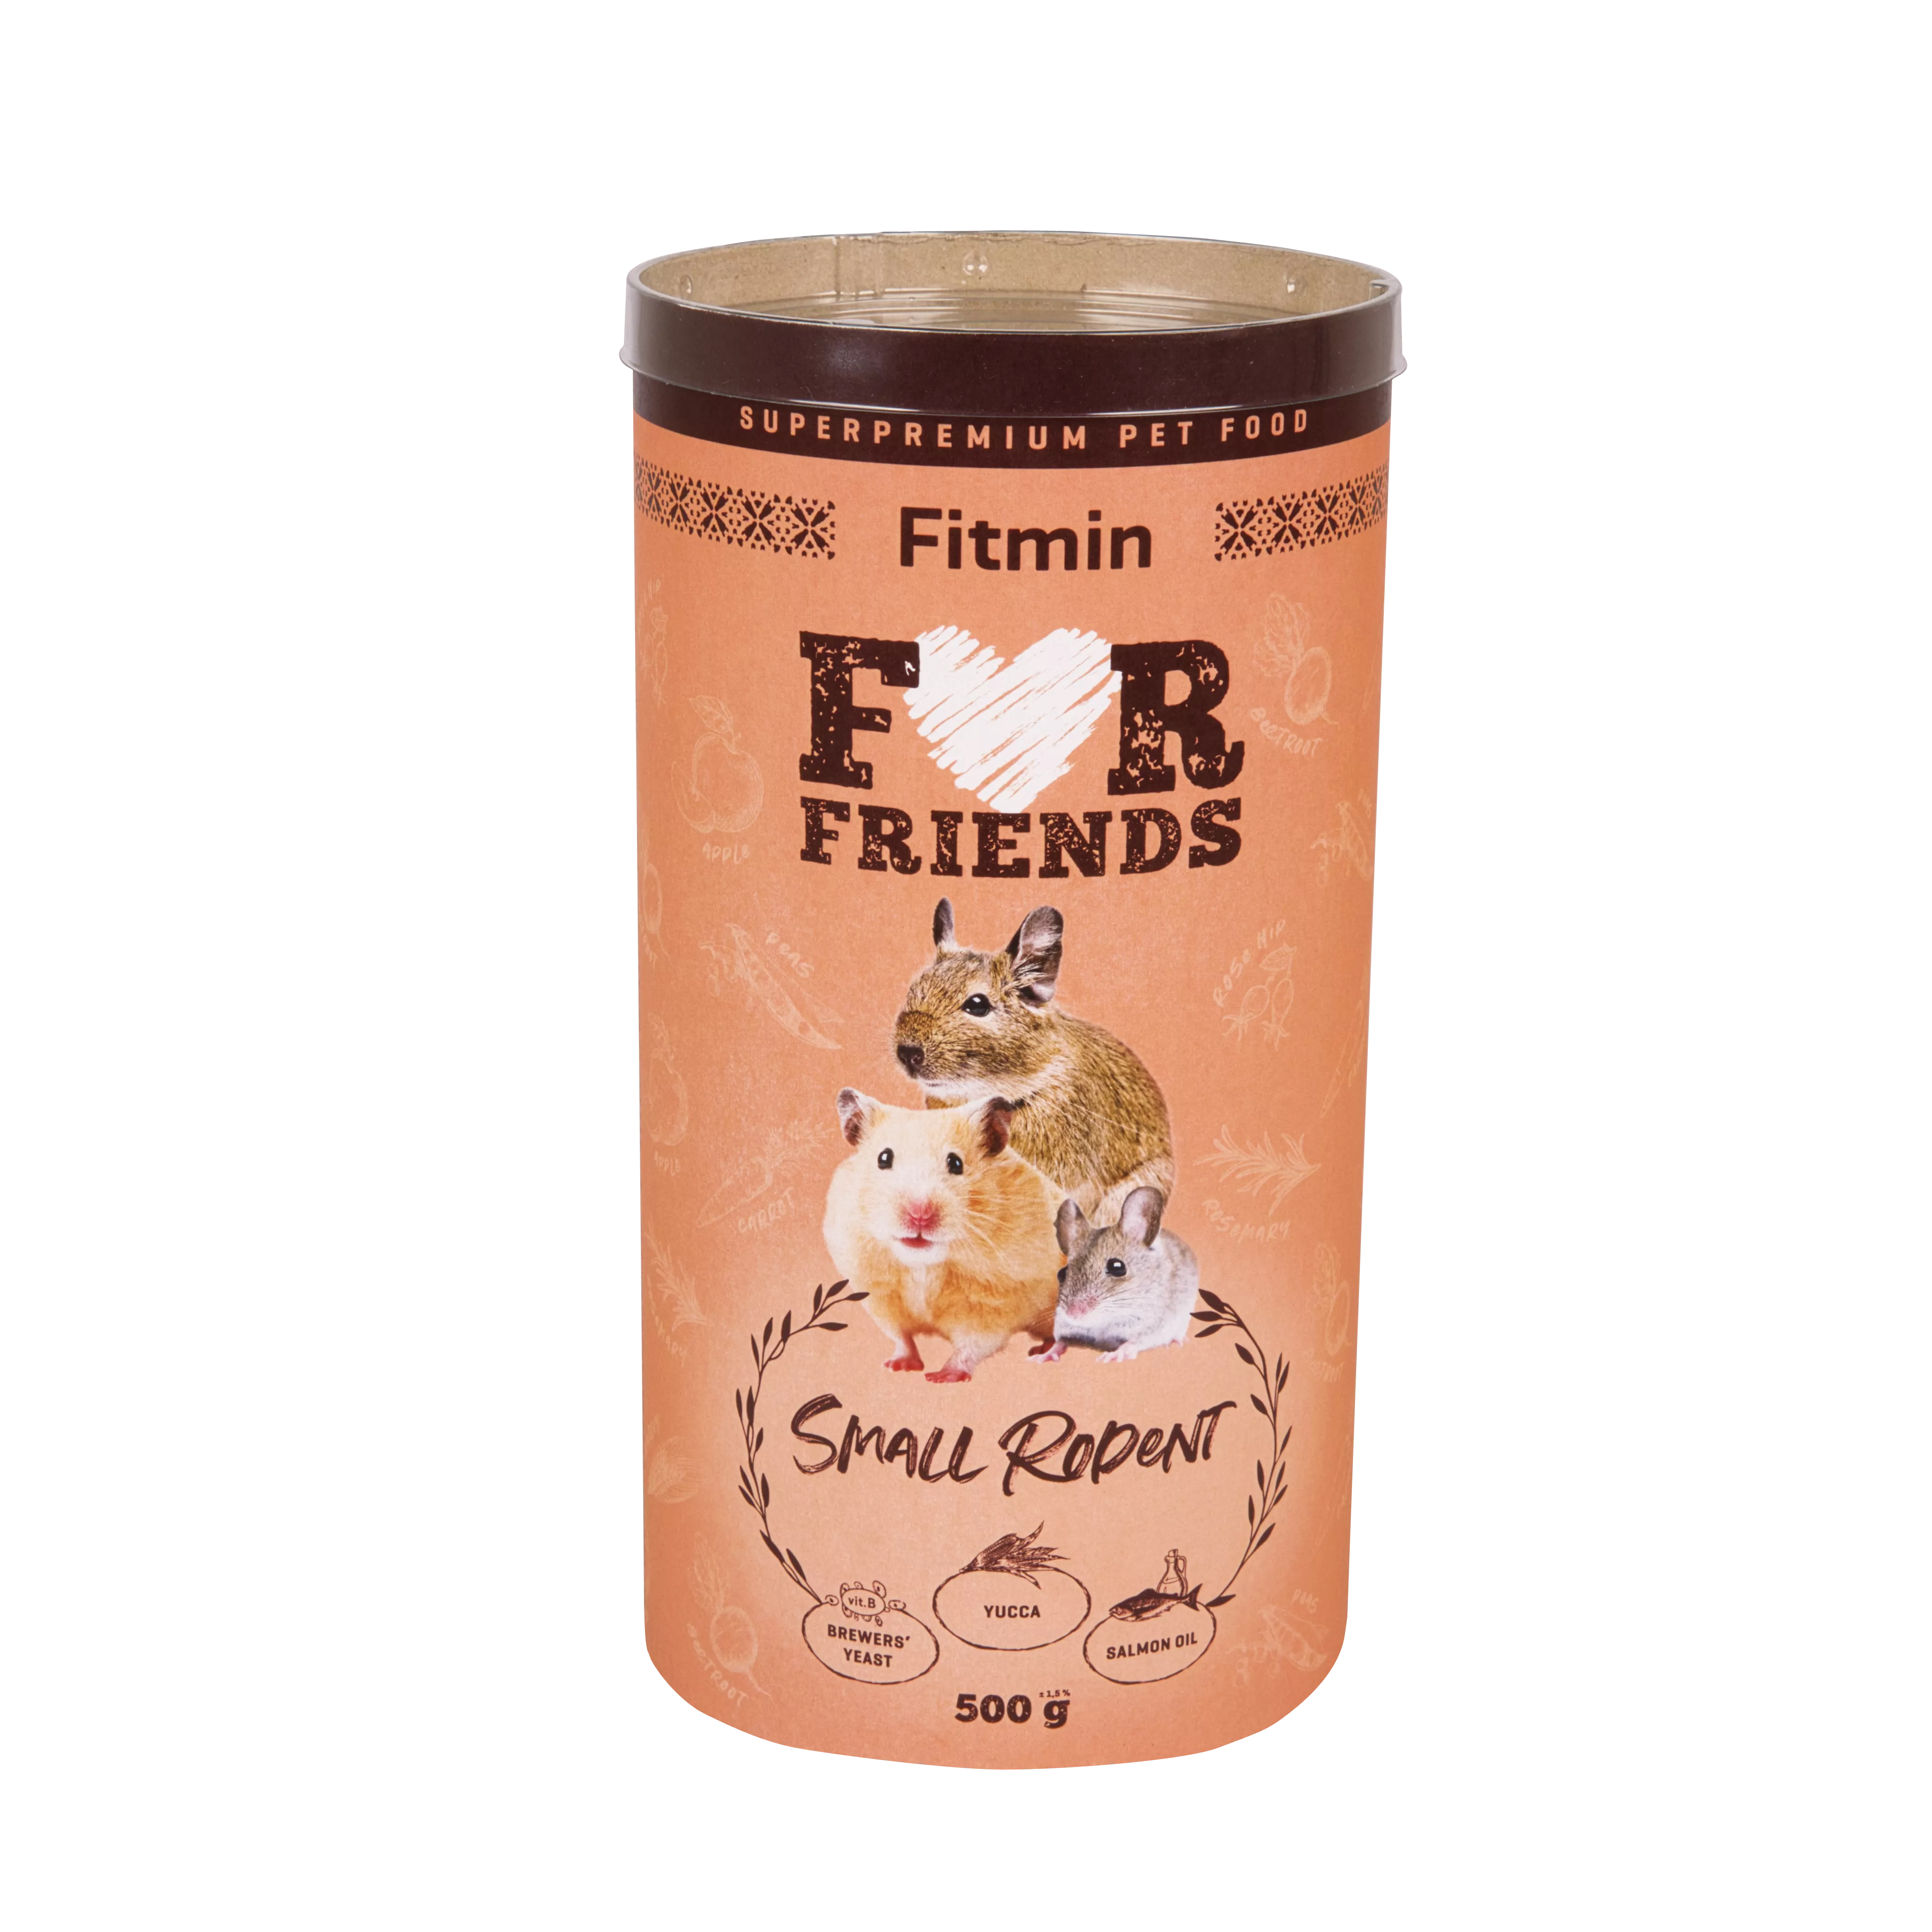 Small Rodent feed for small rodents from the Fitmin For Friends series is a comprehensive formula intended for several types of rodents - hamster, gerbil, rat and mouse